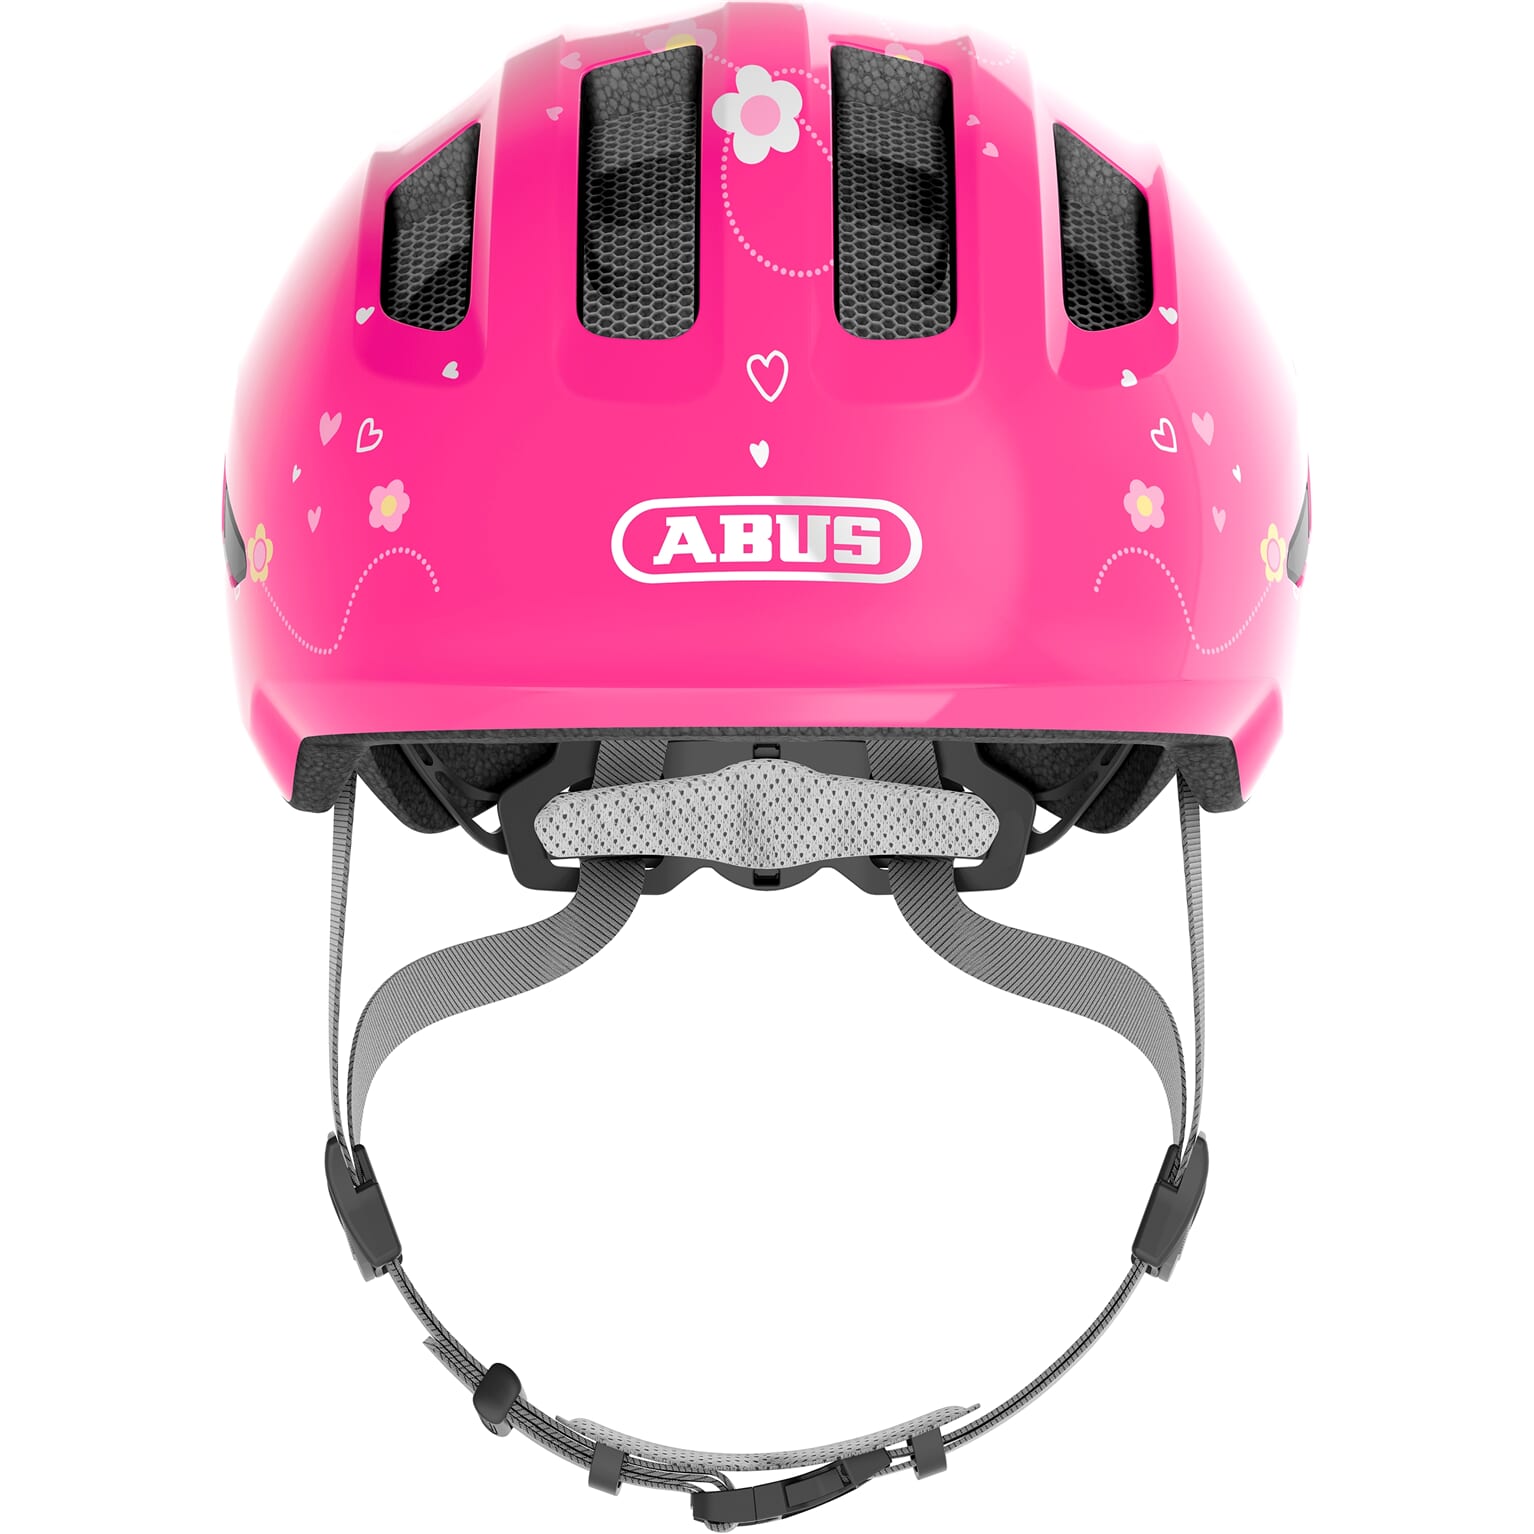 Abus helm Smiley 3.0 pink butterfly M 50-55cm